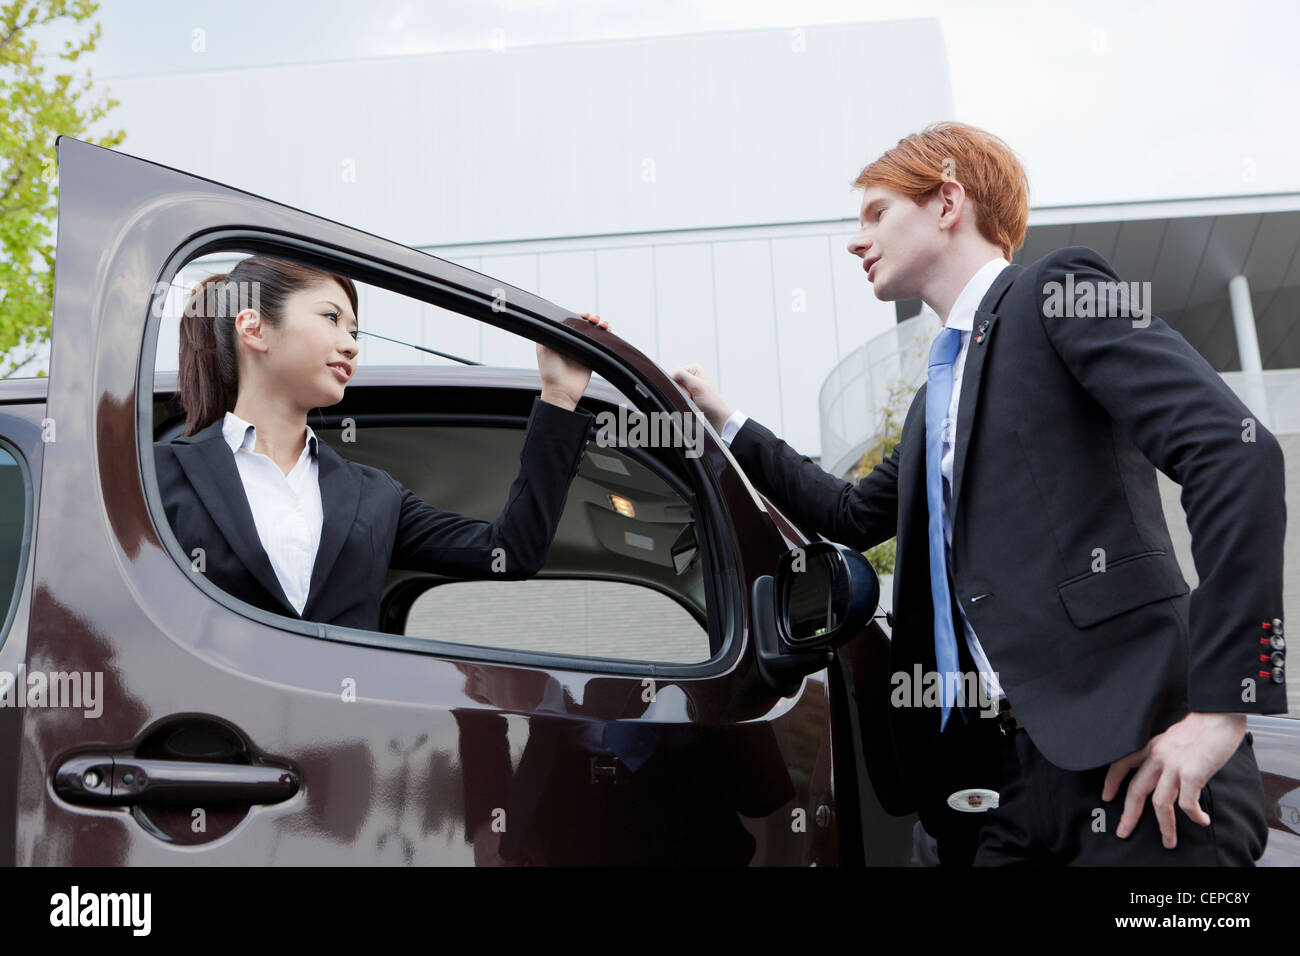 Businessman and businesswoman standing by a car Banque D'Images